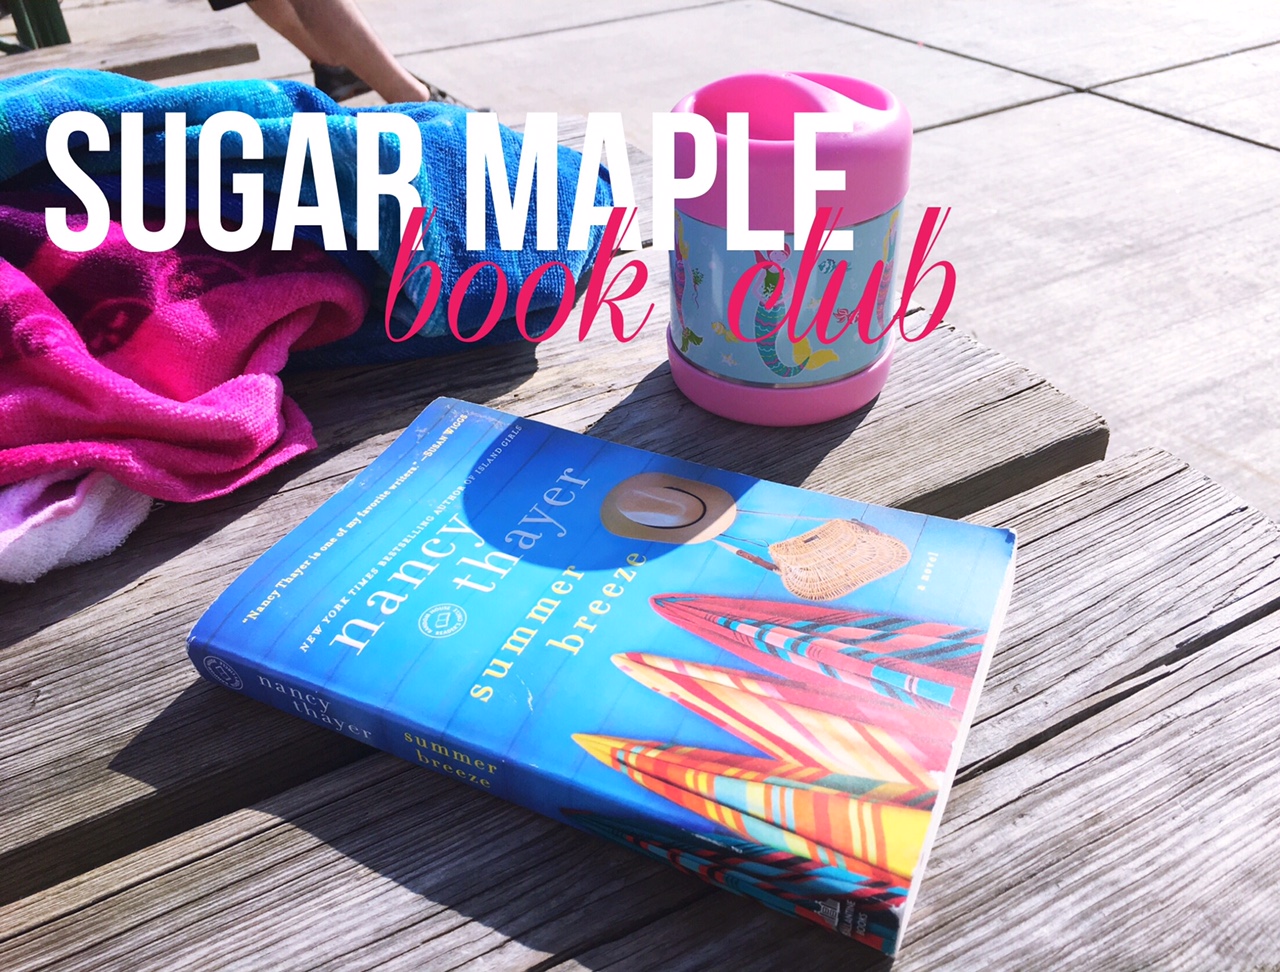 SUGAR MAPLE book club -Summer Breeze by Nancy Thayer - A book club for busy moms (2)